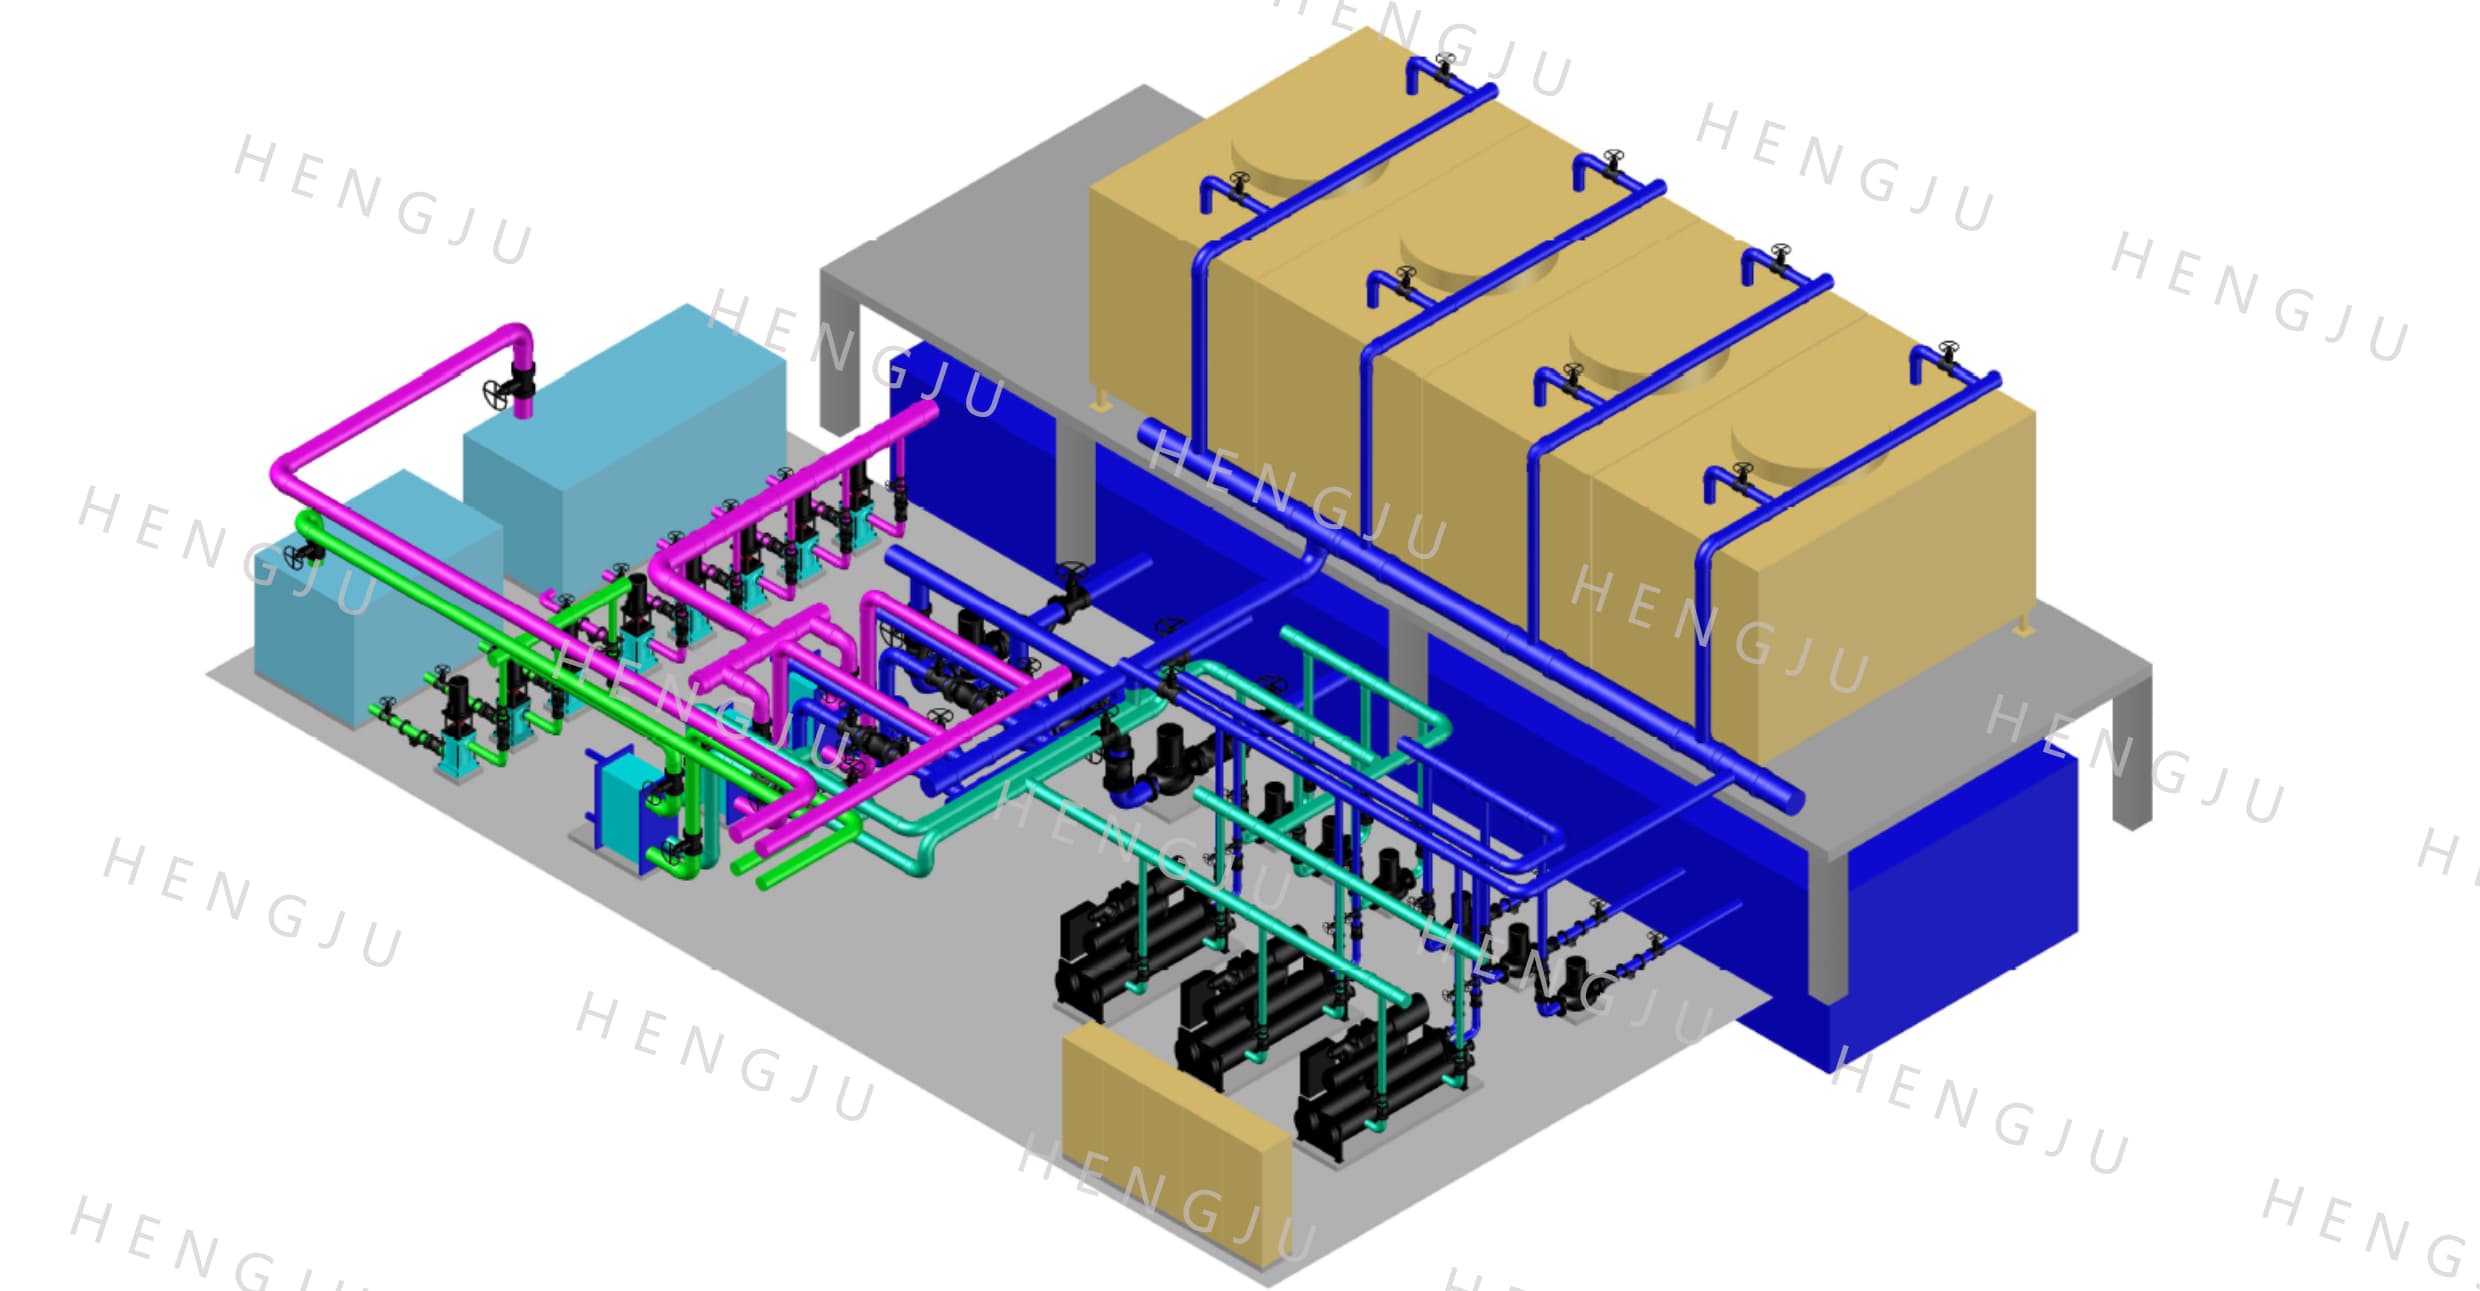 Design renderings of the central chiller system